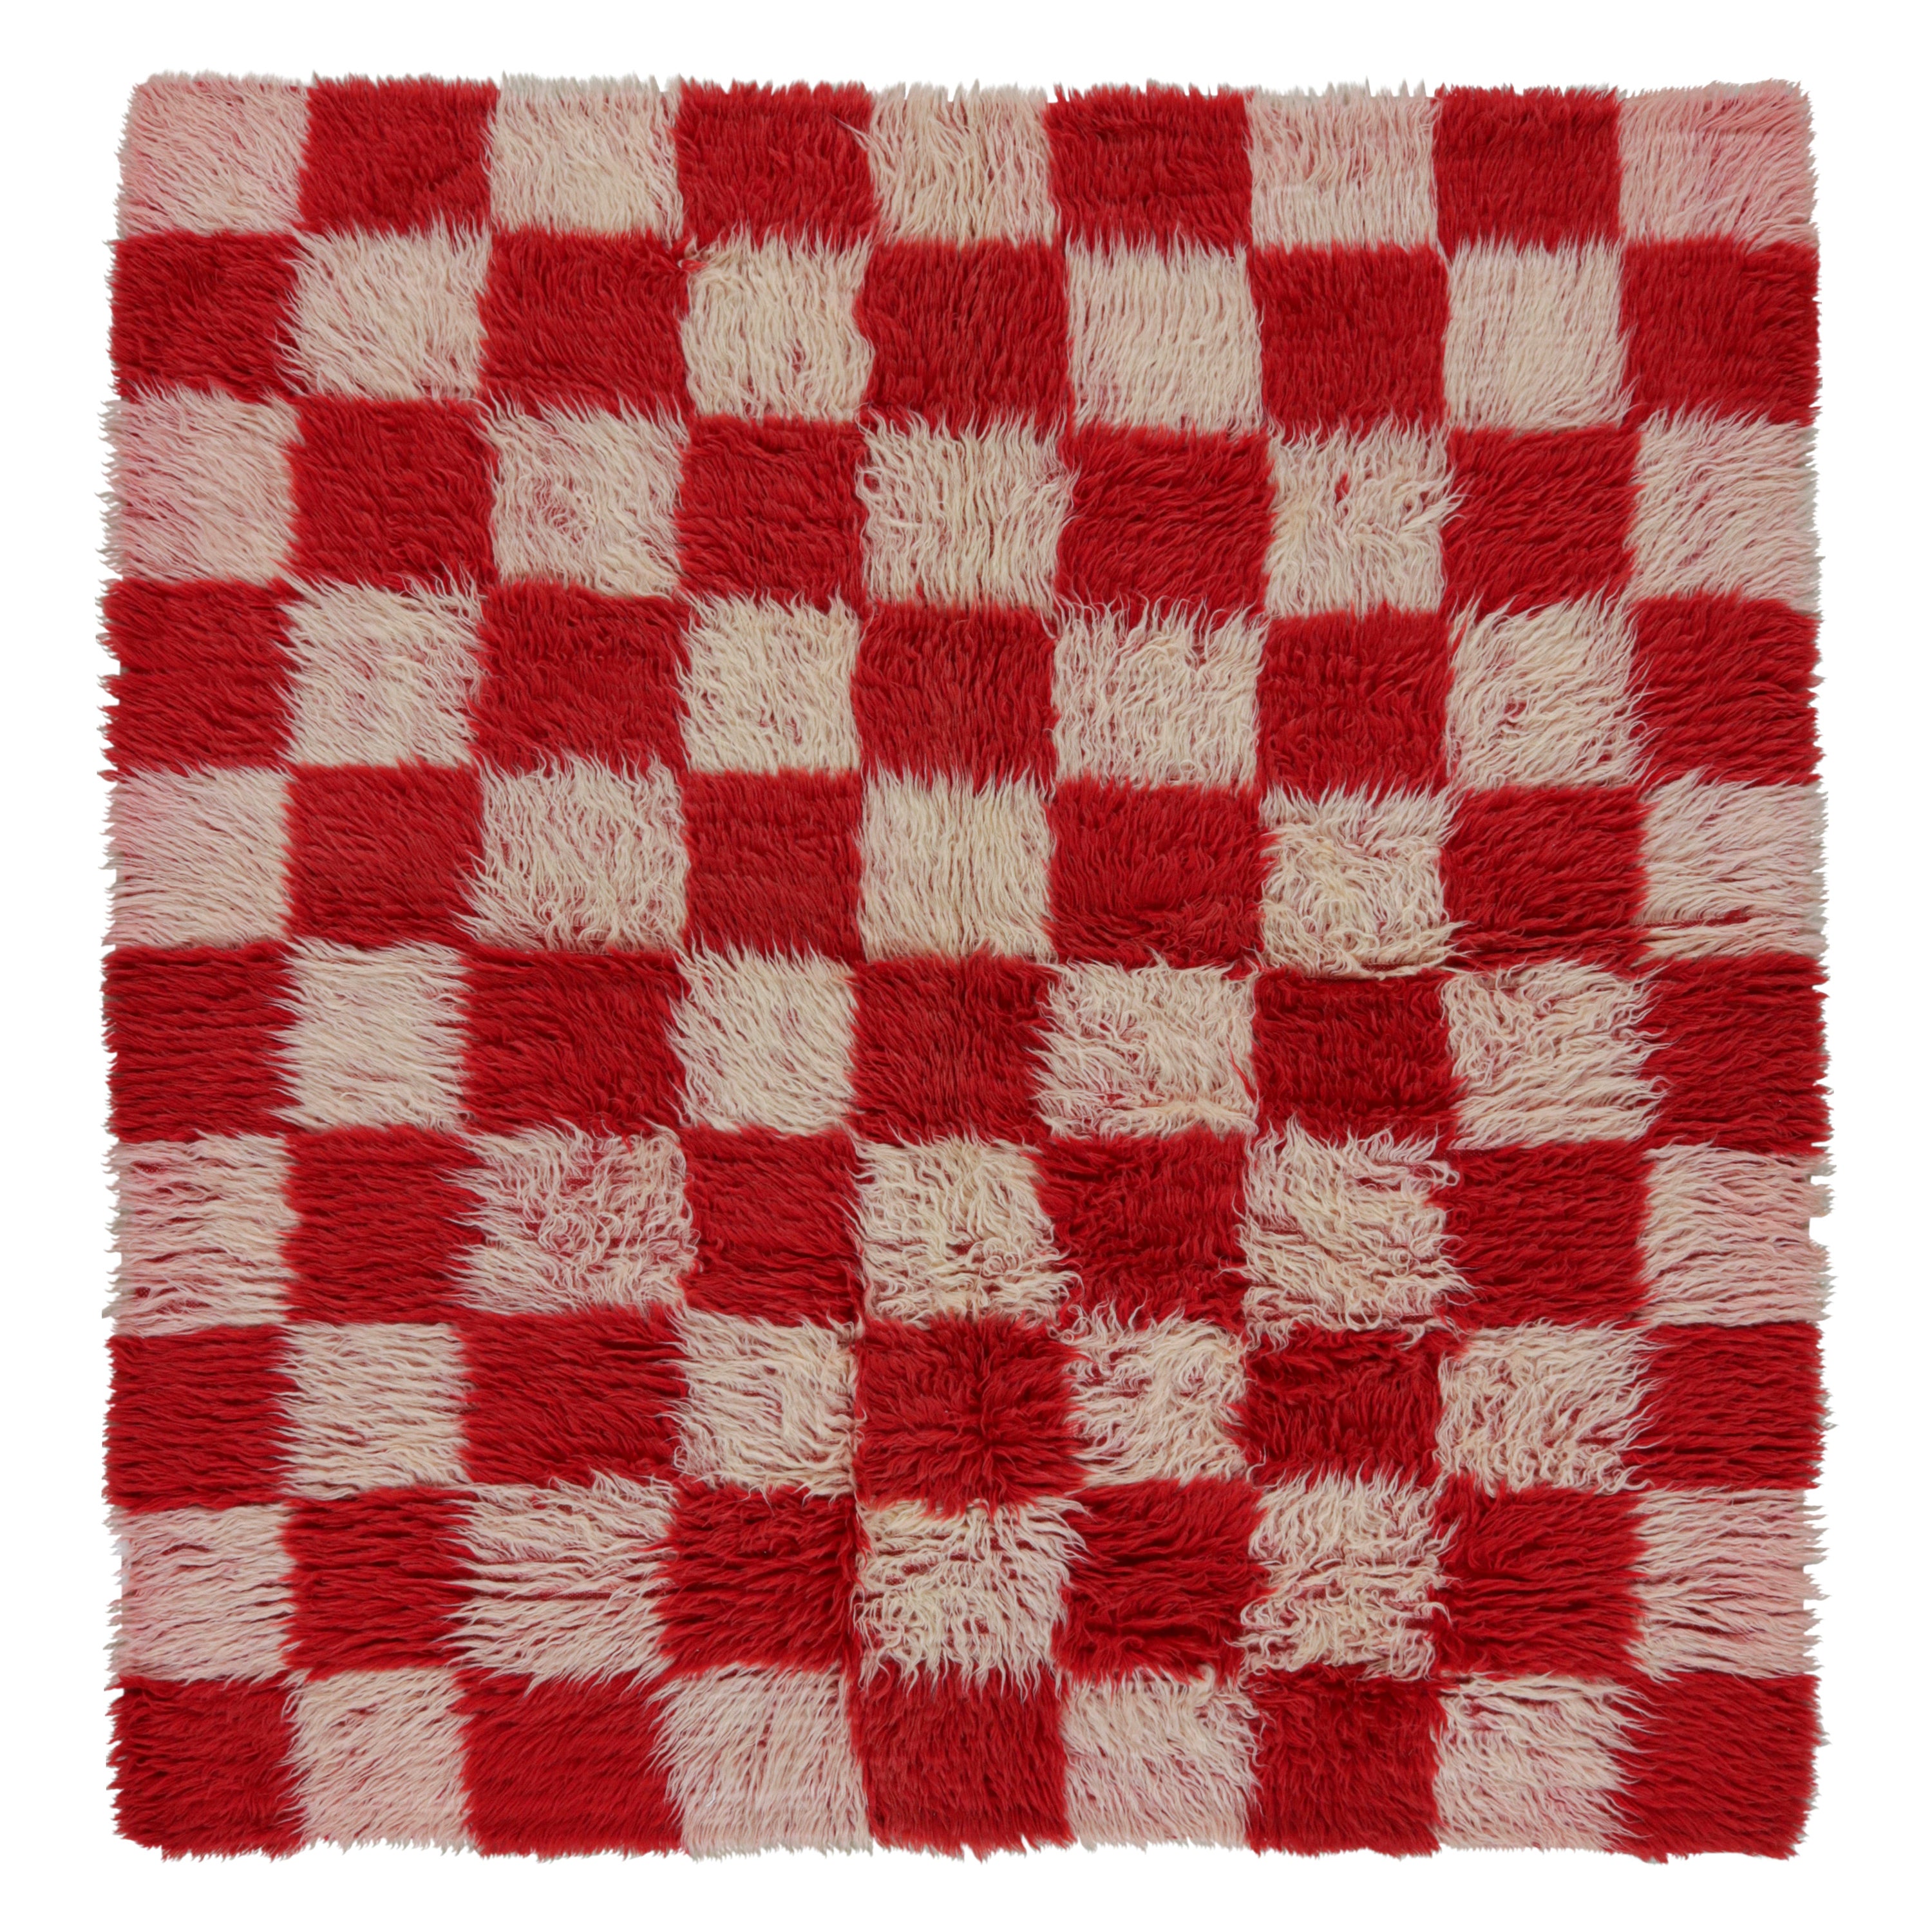 Vintage Square Tulu Rug, with Checkered Geometric Patterns, from Rug & Kilim  For Sale